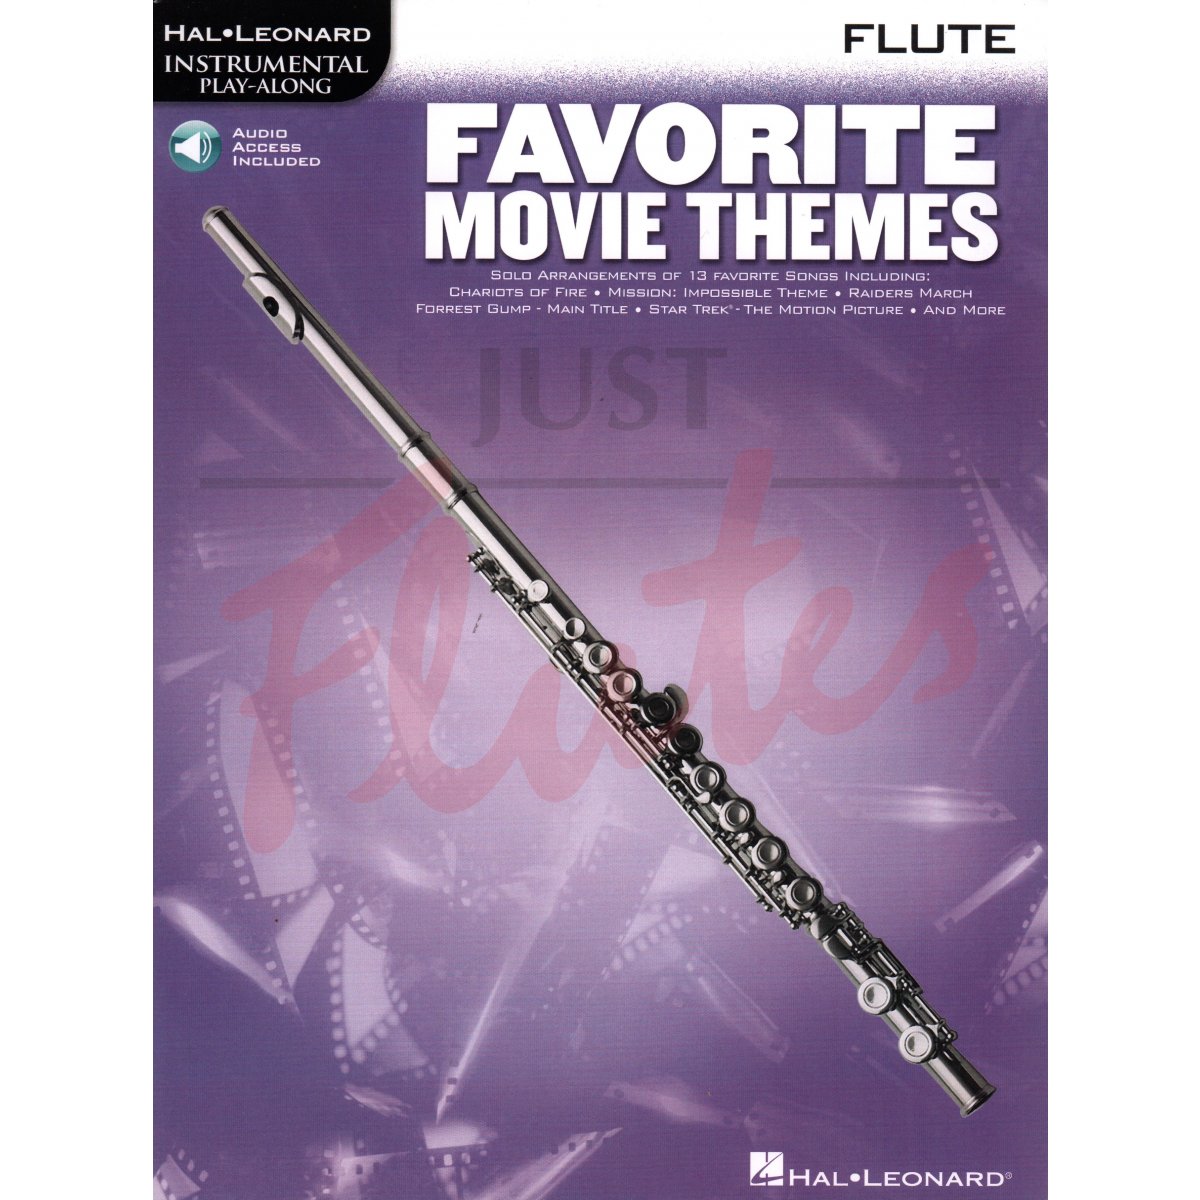 Favorite Movie Themes Play-Along for Flute